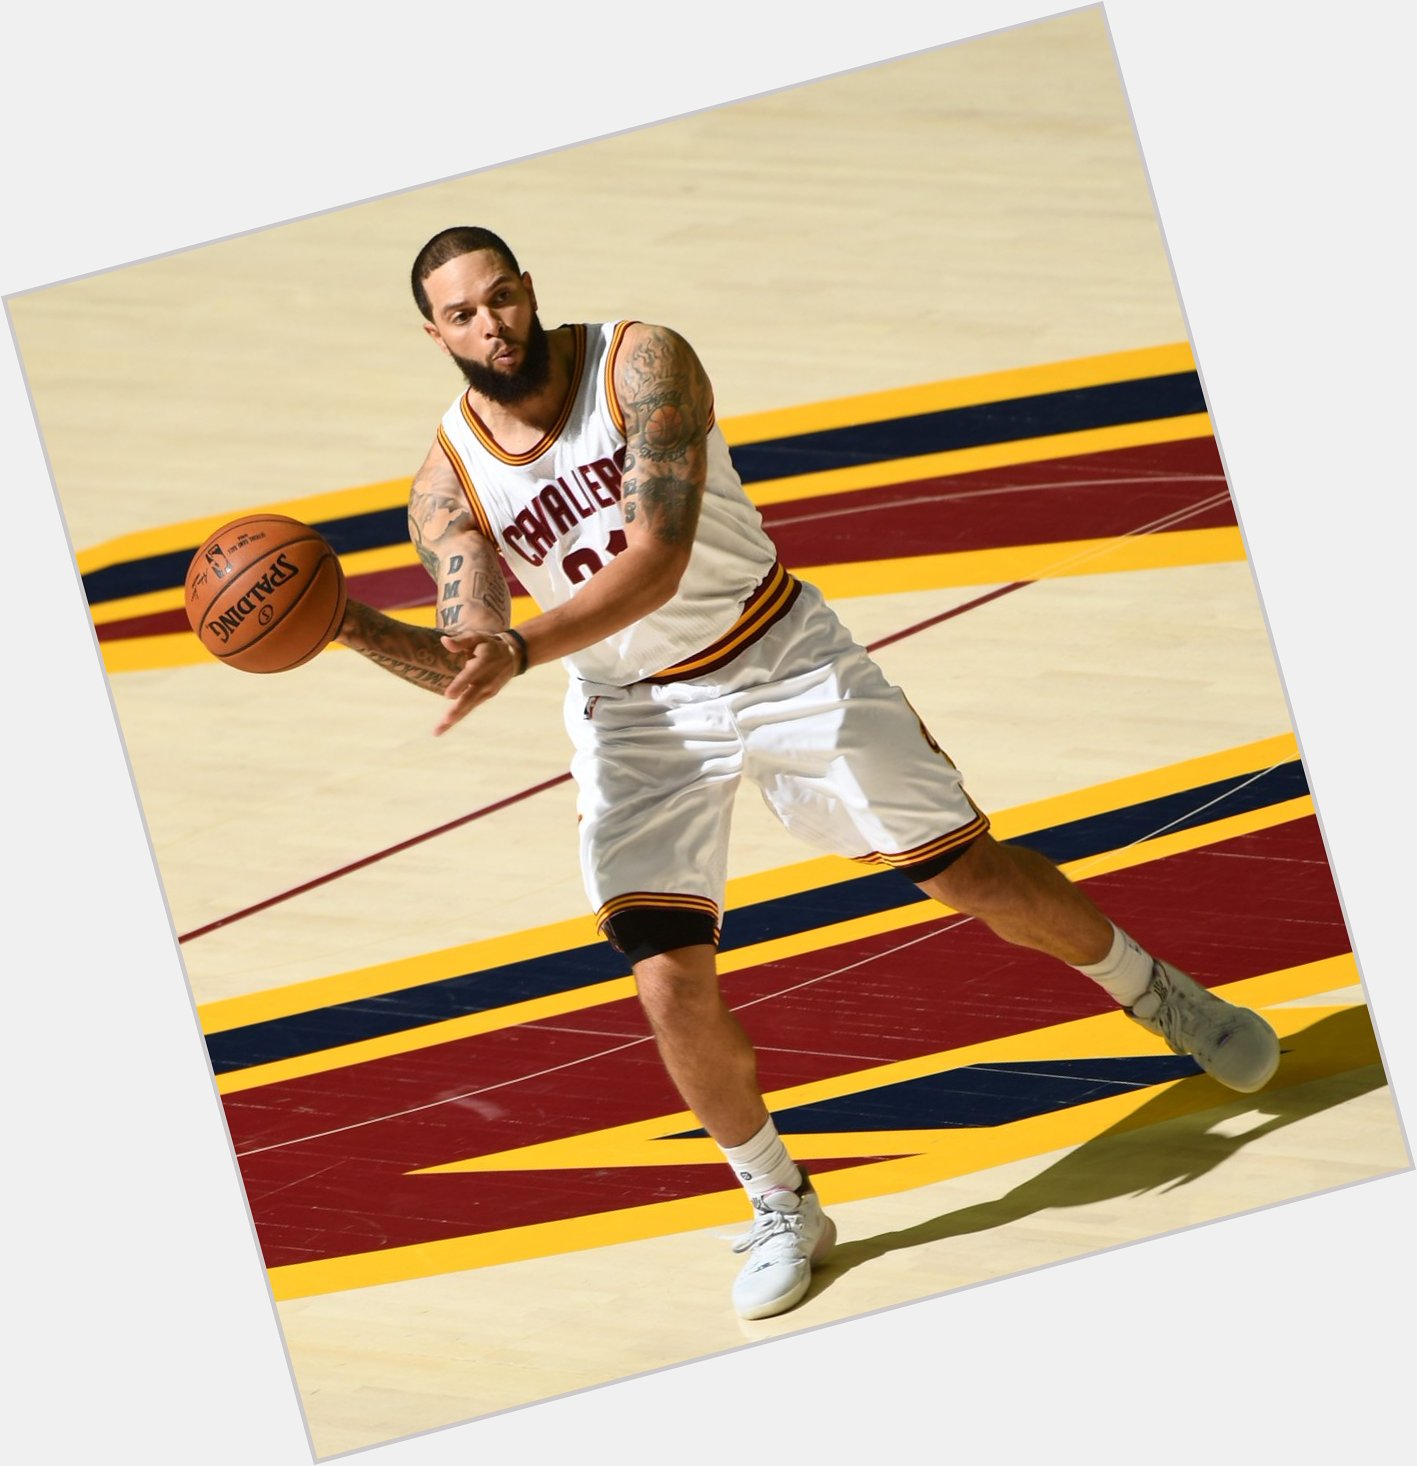 Join us in wishing Deron Williams of the Cleveland Cavaliers a happy 33rd birthday!  